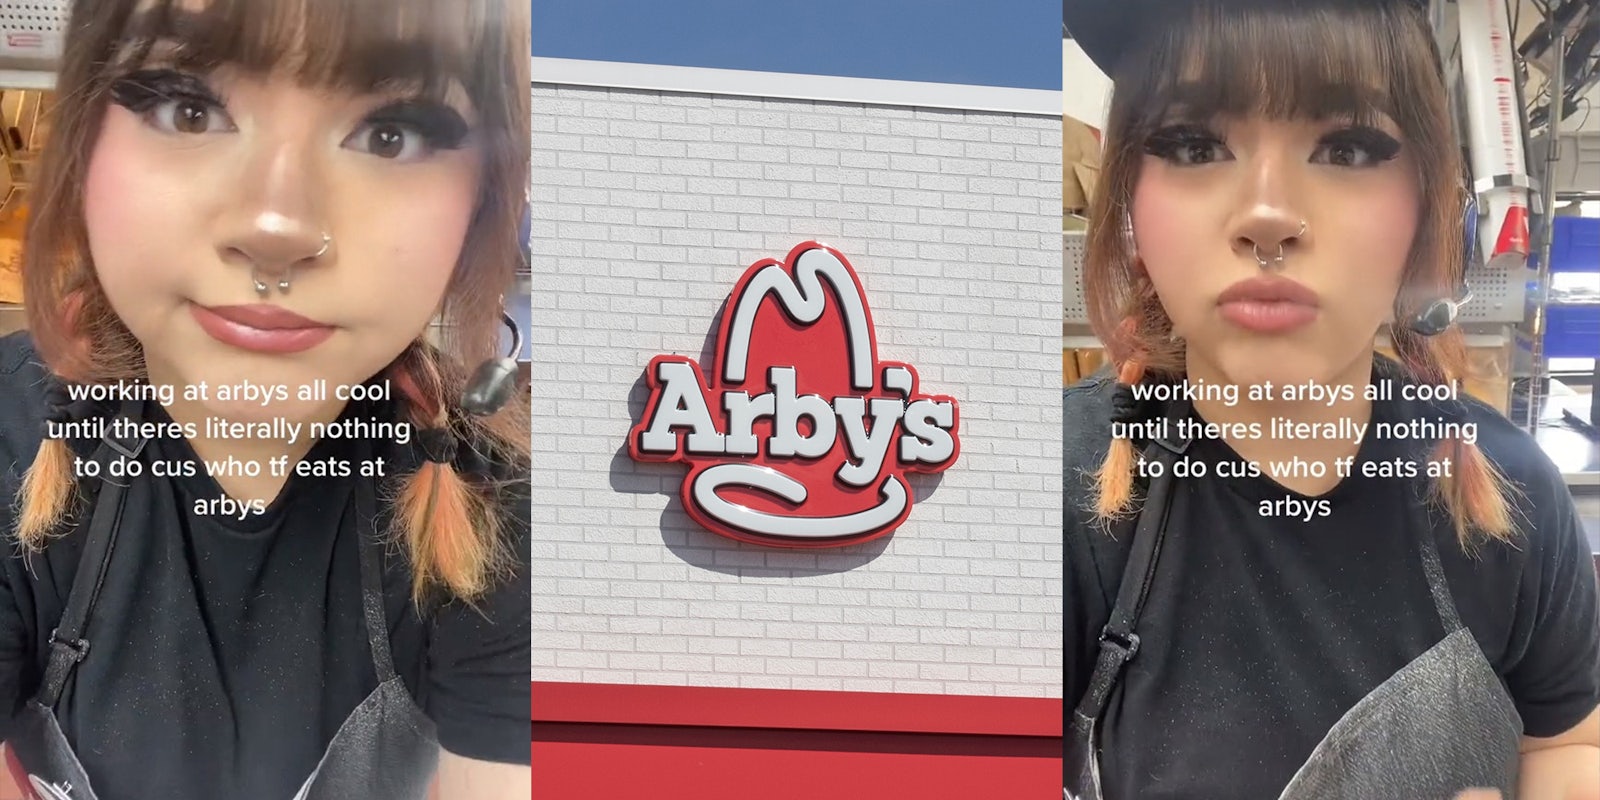 Woman Working at Arby's explaining that she is bored